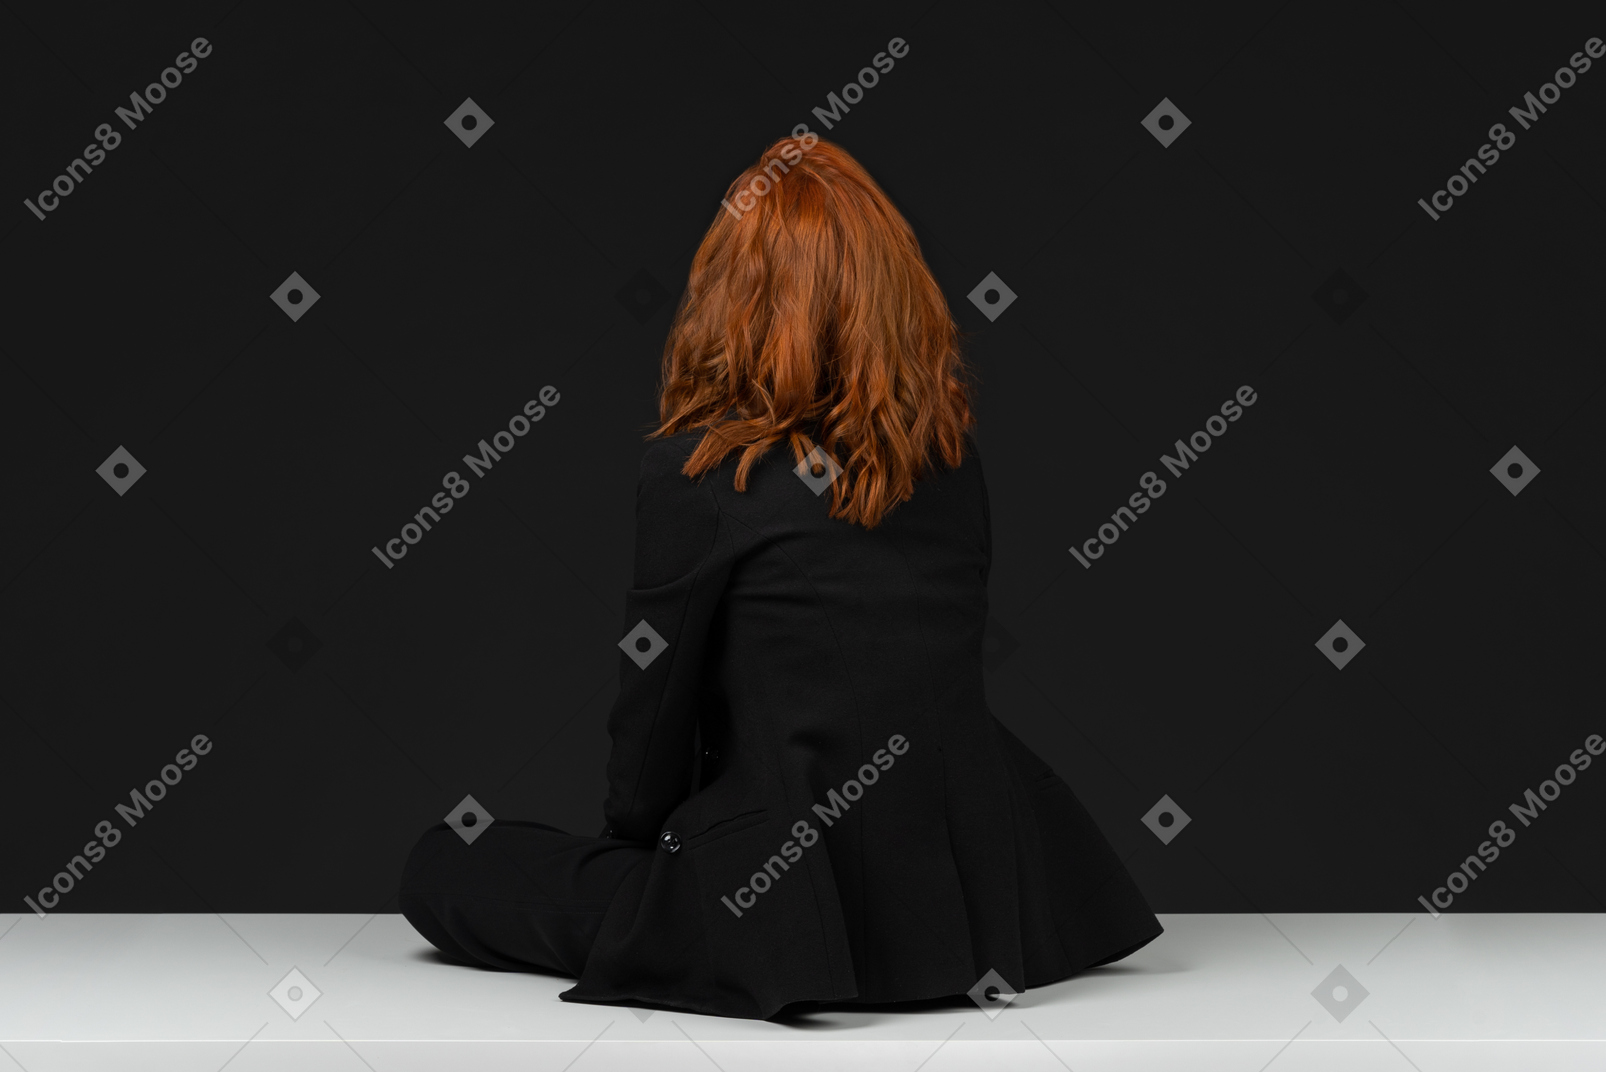 A back side view of the cute red haired woman sitting on the white table